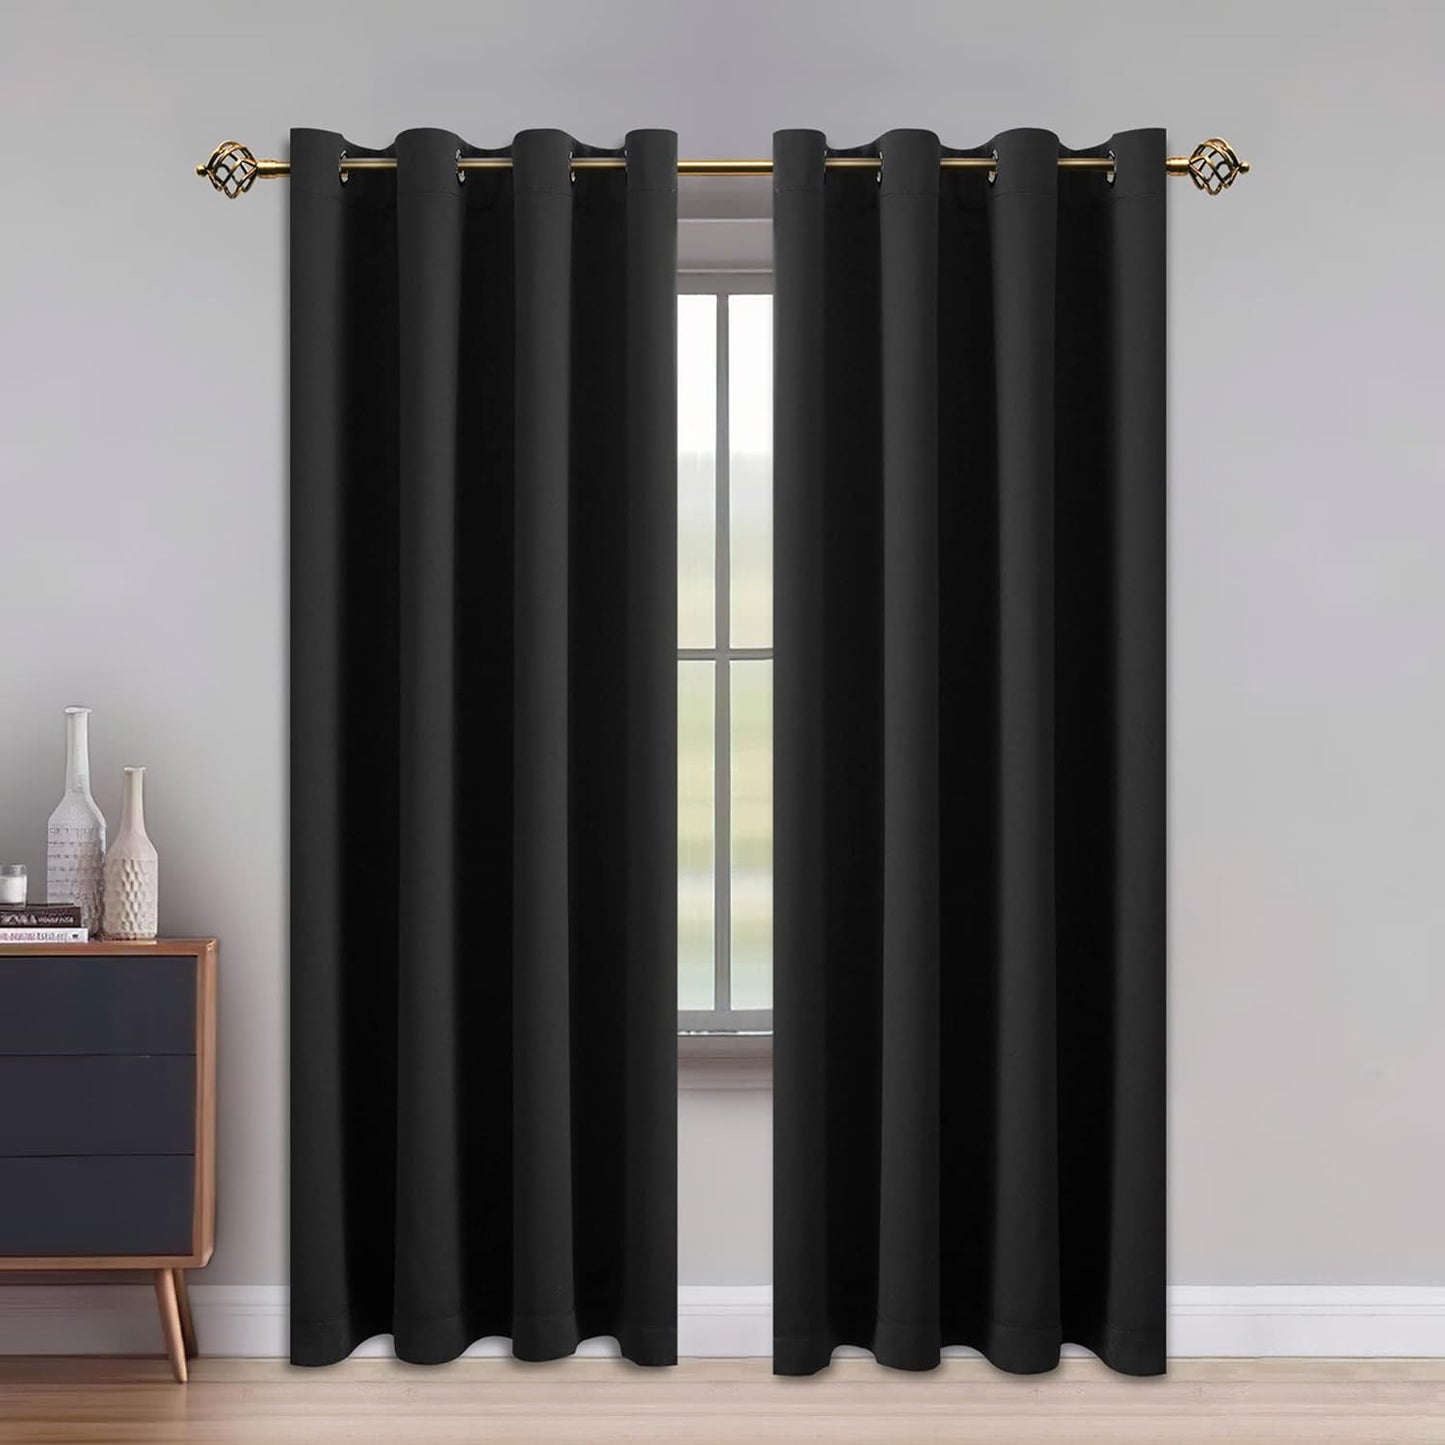 LUSHLEAF Blackout Curtains for Bedroom, Solid Thermal Insulated with Grommet Noise Reduction Window Drapes, Room Darkening Curtains for Living Room, 2 Panels, 52 X 63 Inch Grey  SHEEROOM Black 52 X 108 Inch 